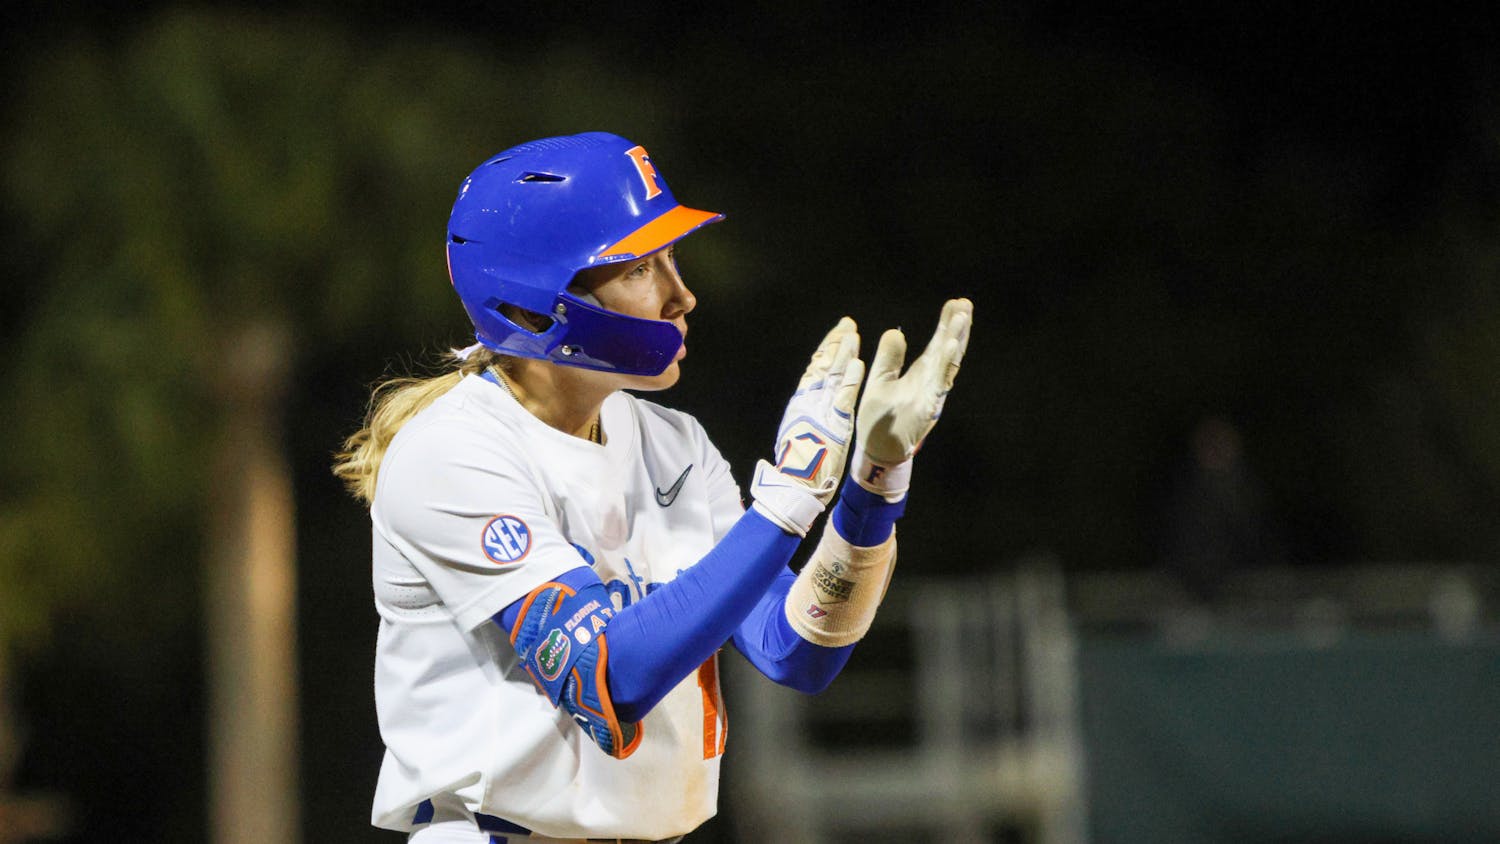 Florida shortstop Skylar Wallace claps during the Gators' 3-0 victory against the Central Florida Knights Wednesday, March 8, 2023.